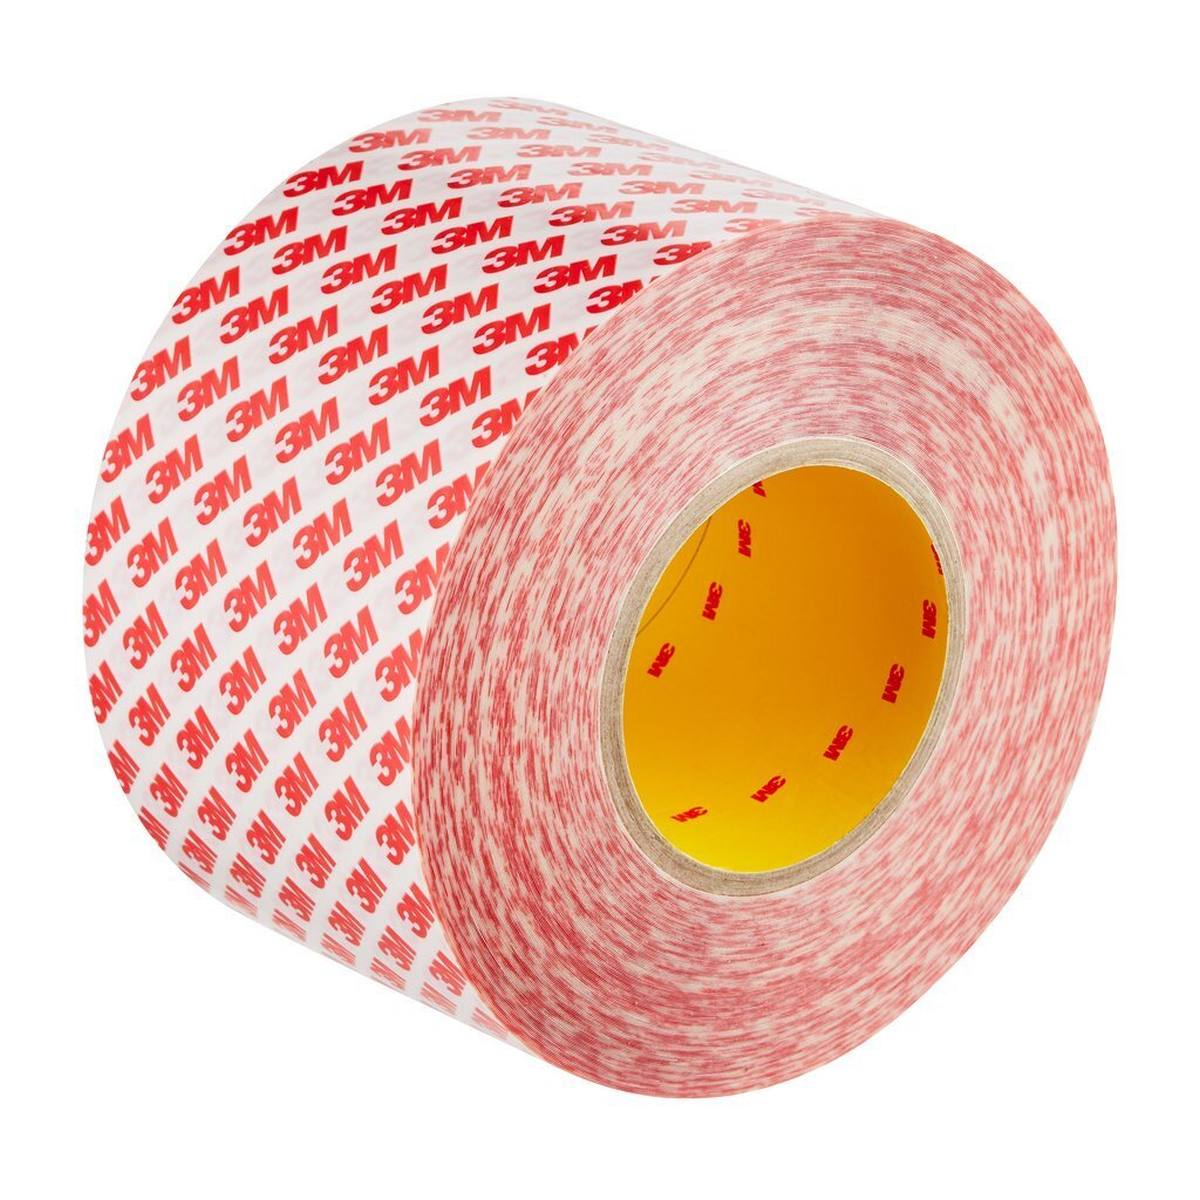 3M Double-sided adhesive tape with polyester backing GPT-020F, transparent, 100 mm x 50 m, 0.202 mm